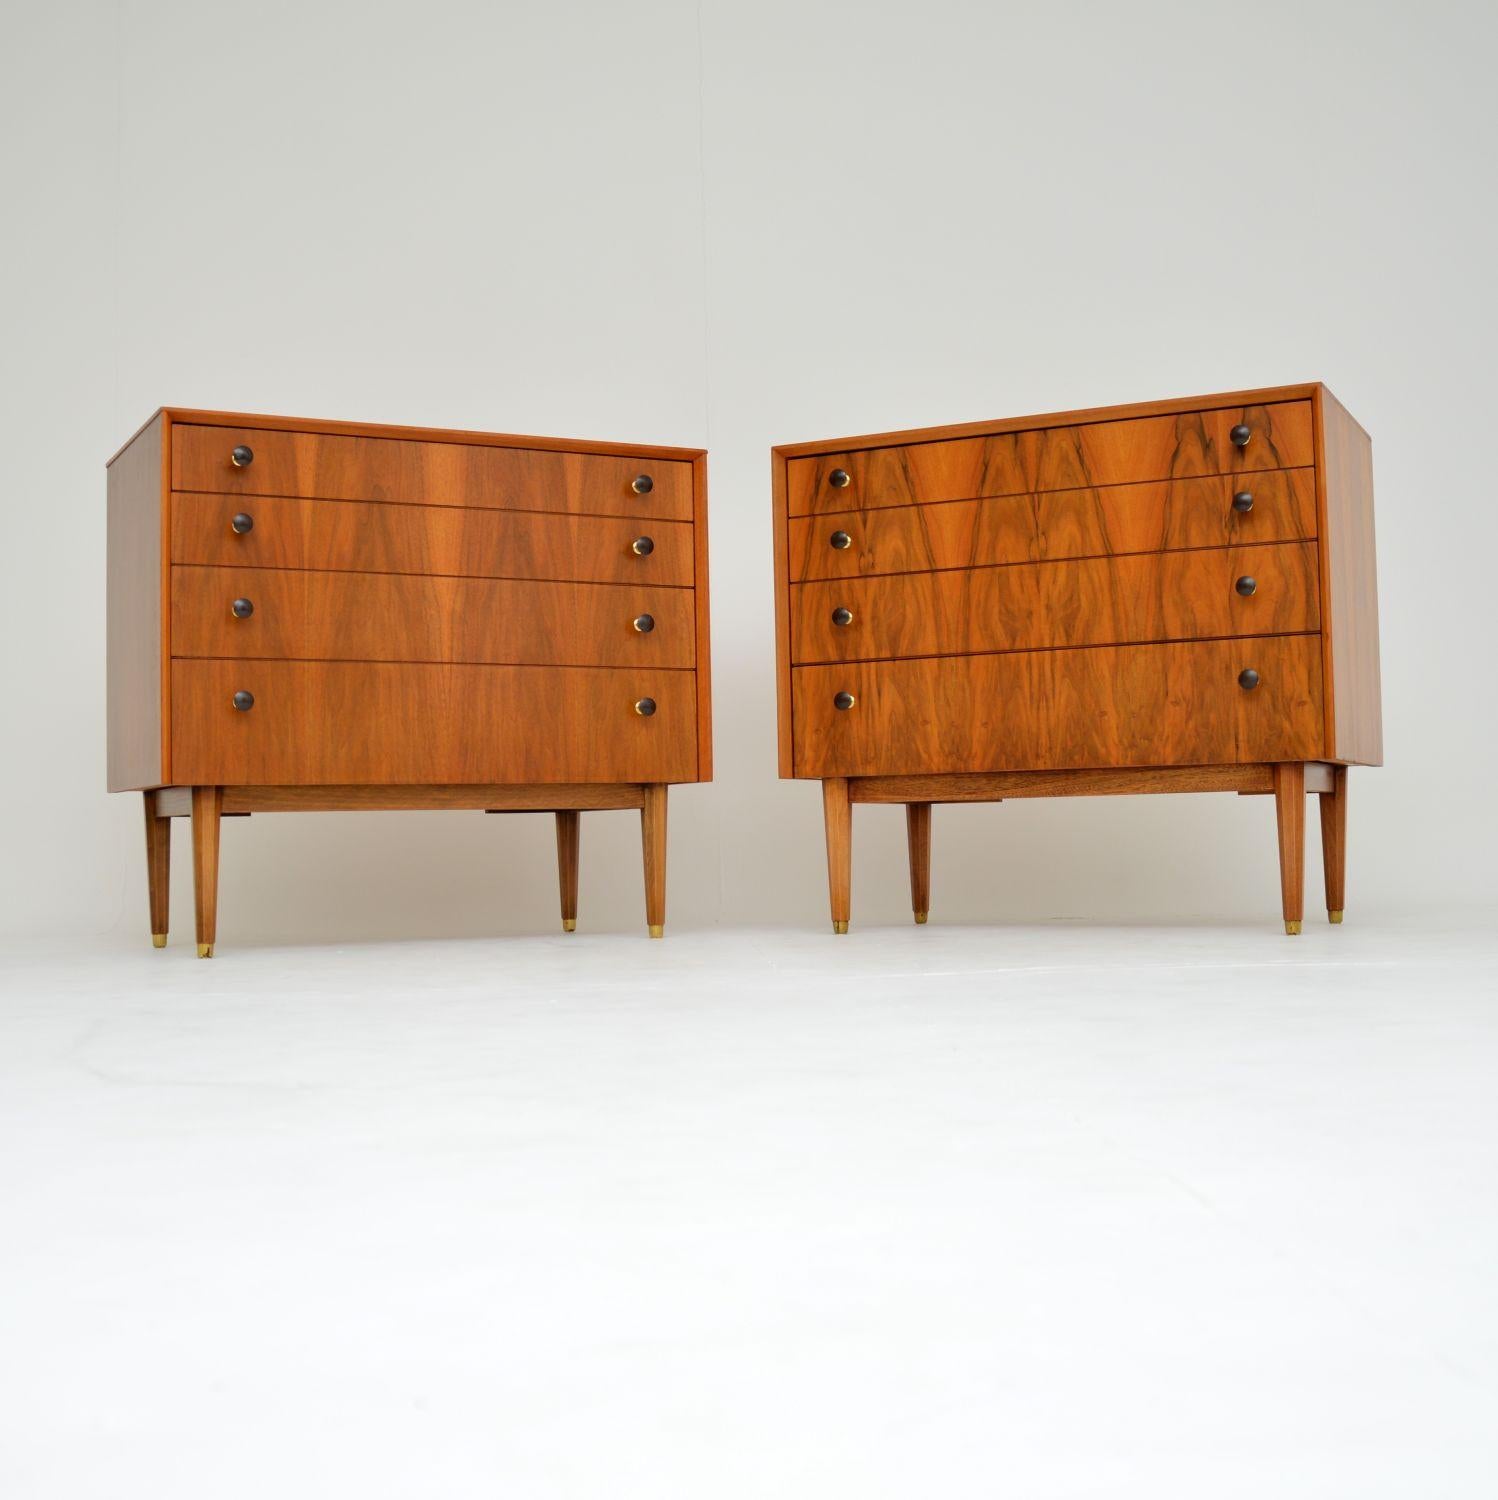 A stylish and very rare pair of walnut chests of drawers. These were made by G Plan, they date from the 1960s.

They are a fantastic Size and are of amazing quality. The walnut is richly figured with stunning grain patterns, and a beautiful, warm